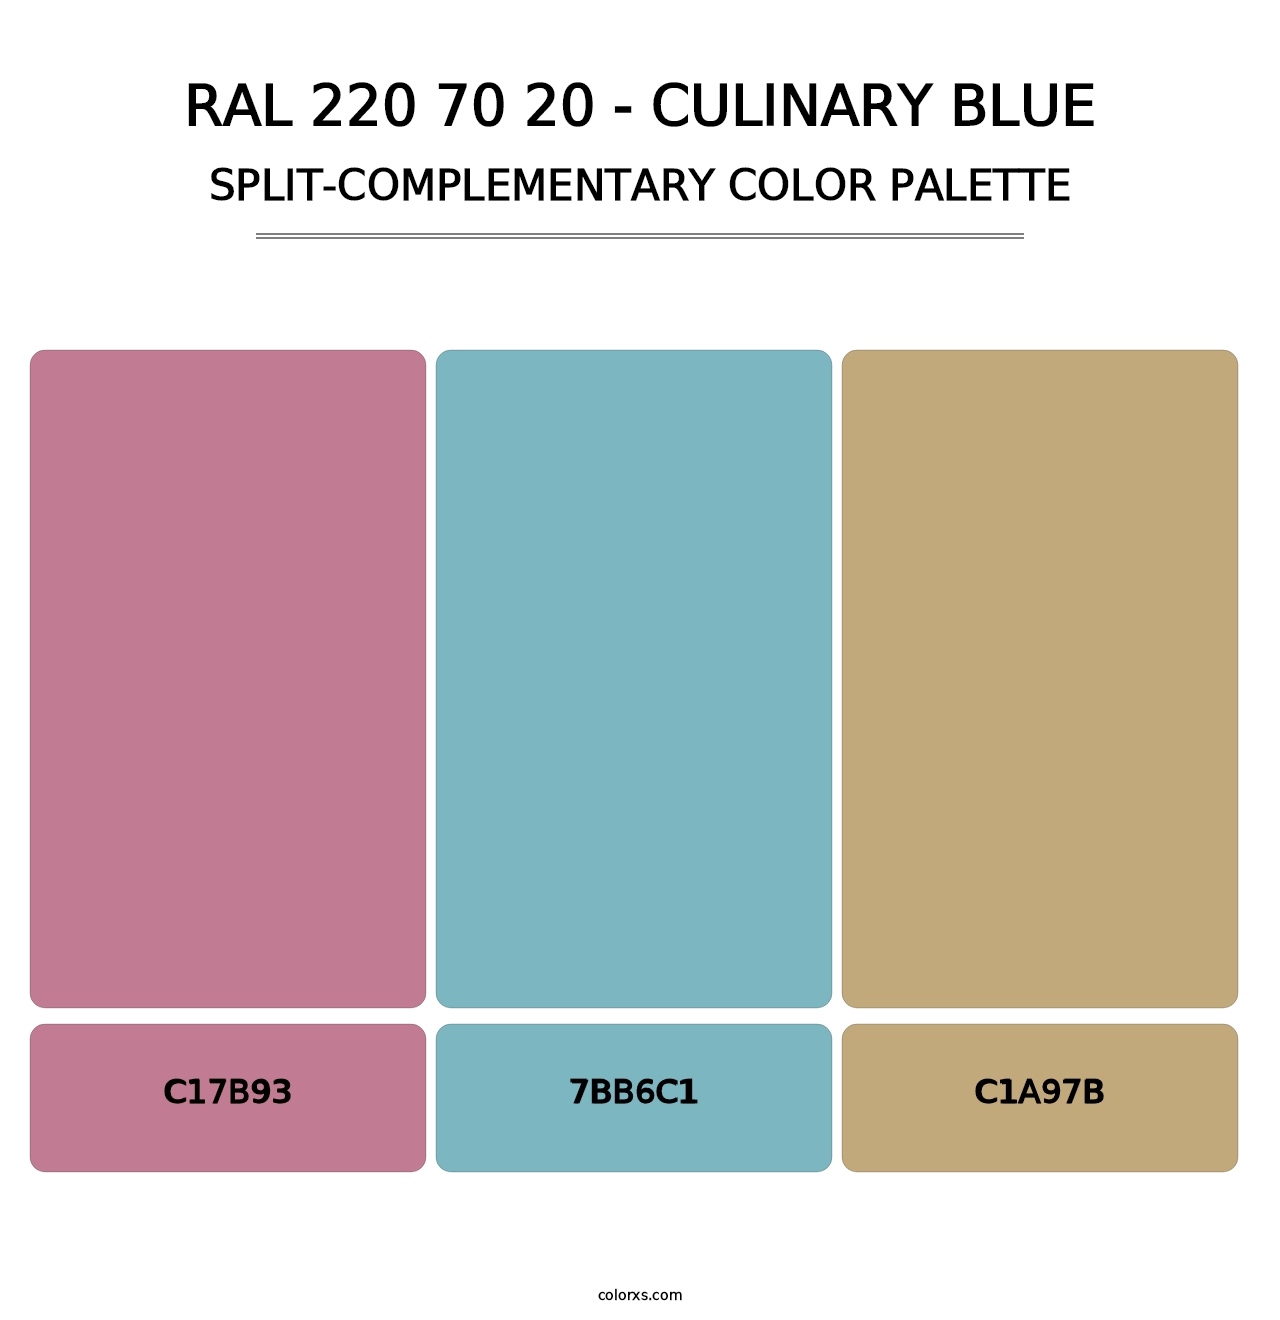 RAL 220 70 20 - Culinary Blue - Split-Complementary Color Palette